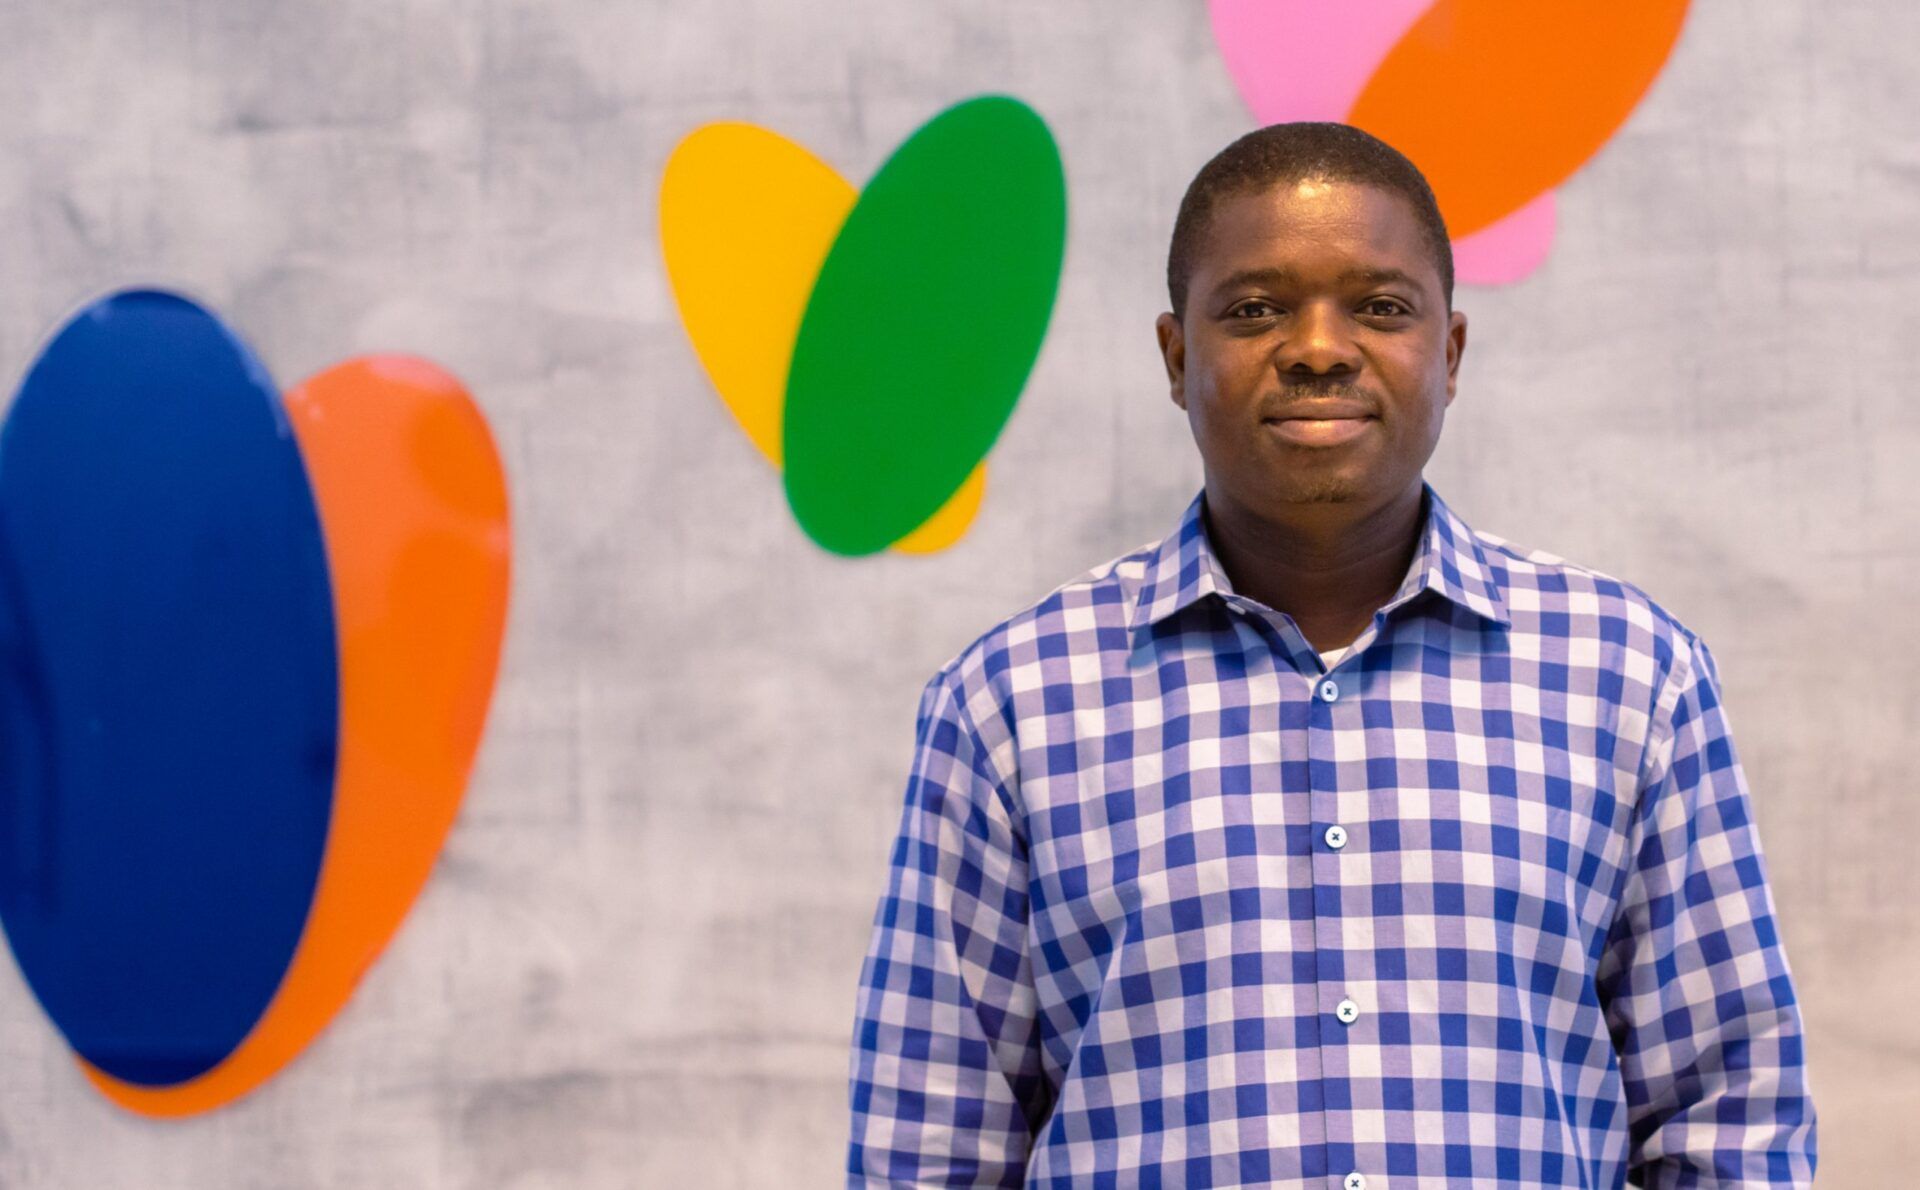 Leading Payments Company, Flutterwave appoints Emmanuel Efenure as Head of Risk for Africa